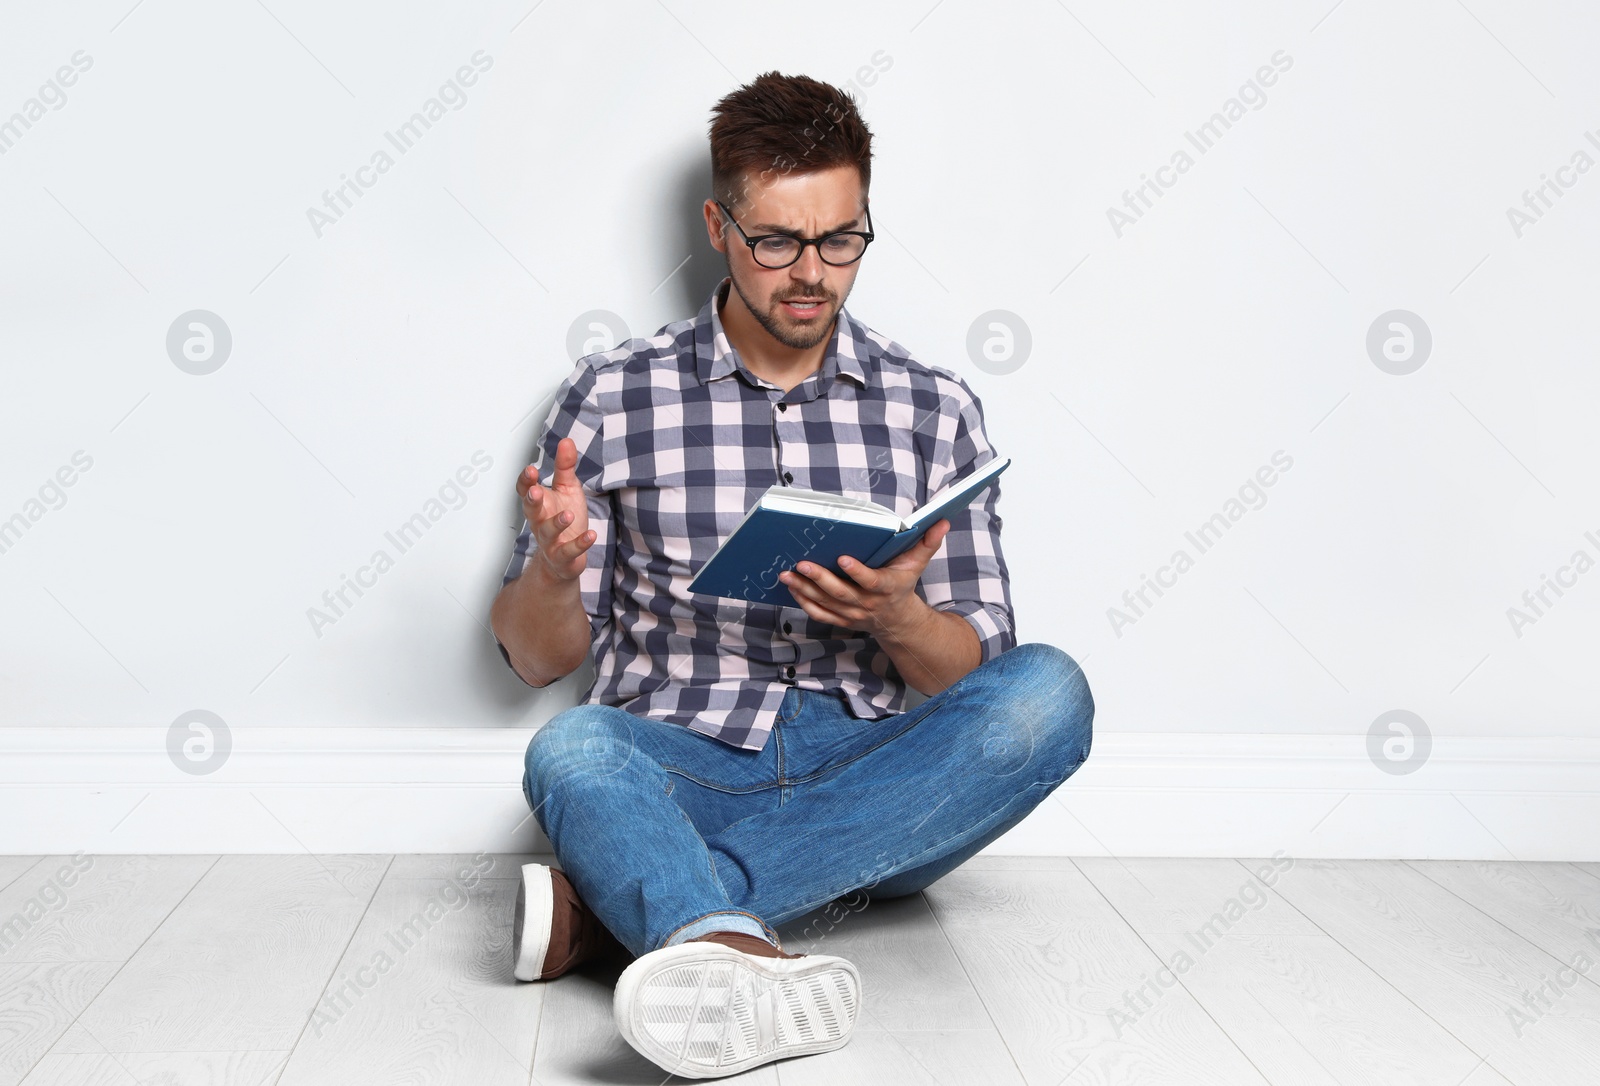 Photo of Handsome young man reading book on wooden floor near light wall